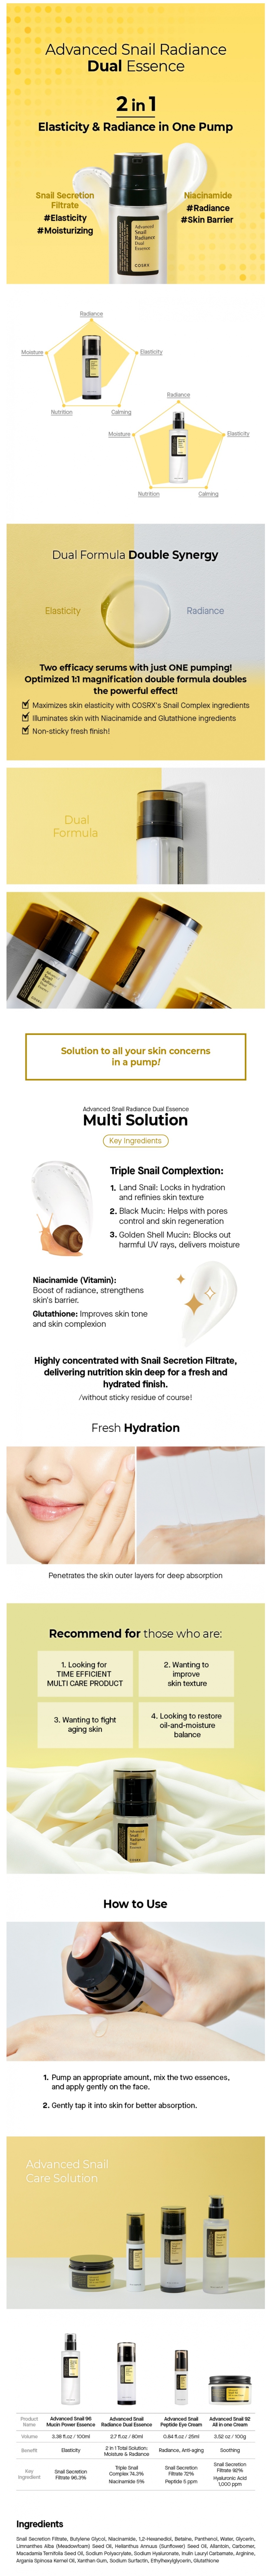 COSRX Advanced Snail Radiance Dual Essence korean cosmetic skincare product online shop malaysia China philippines1